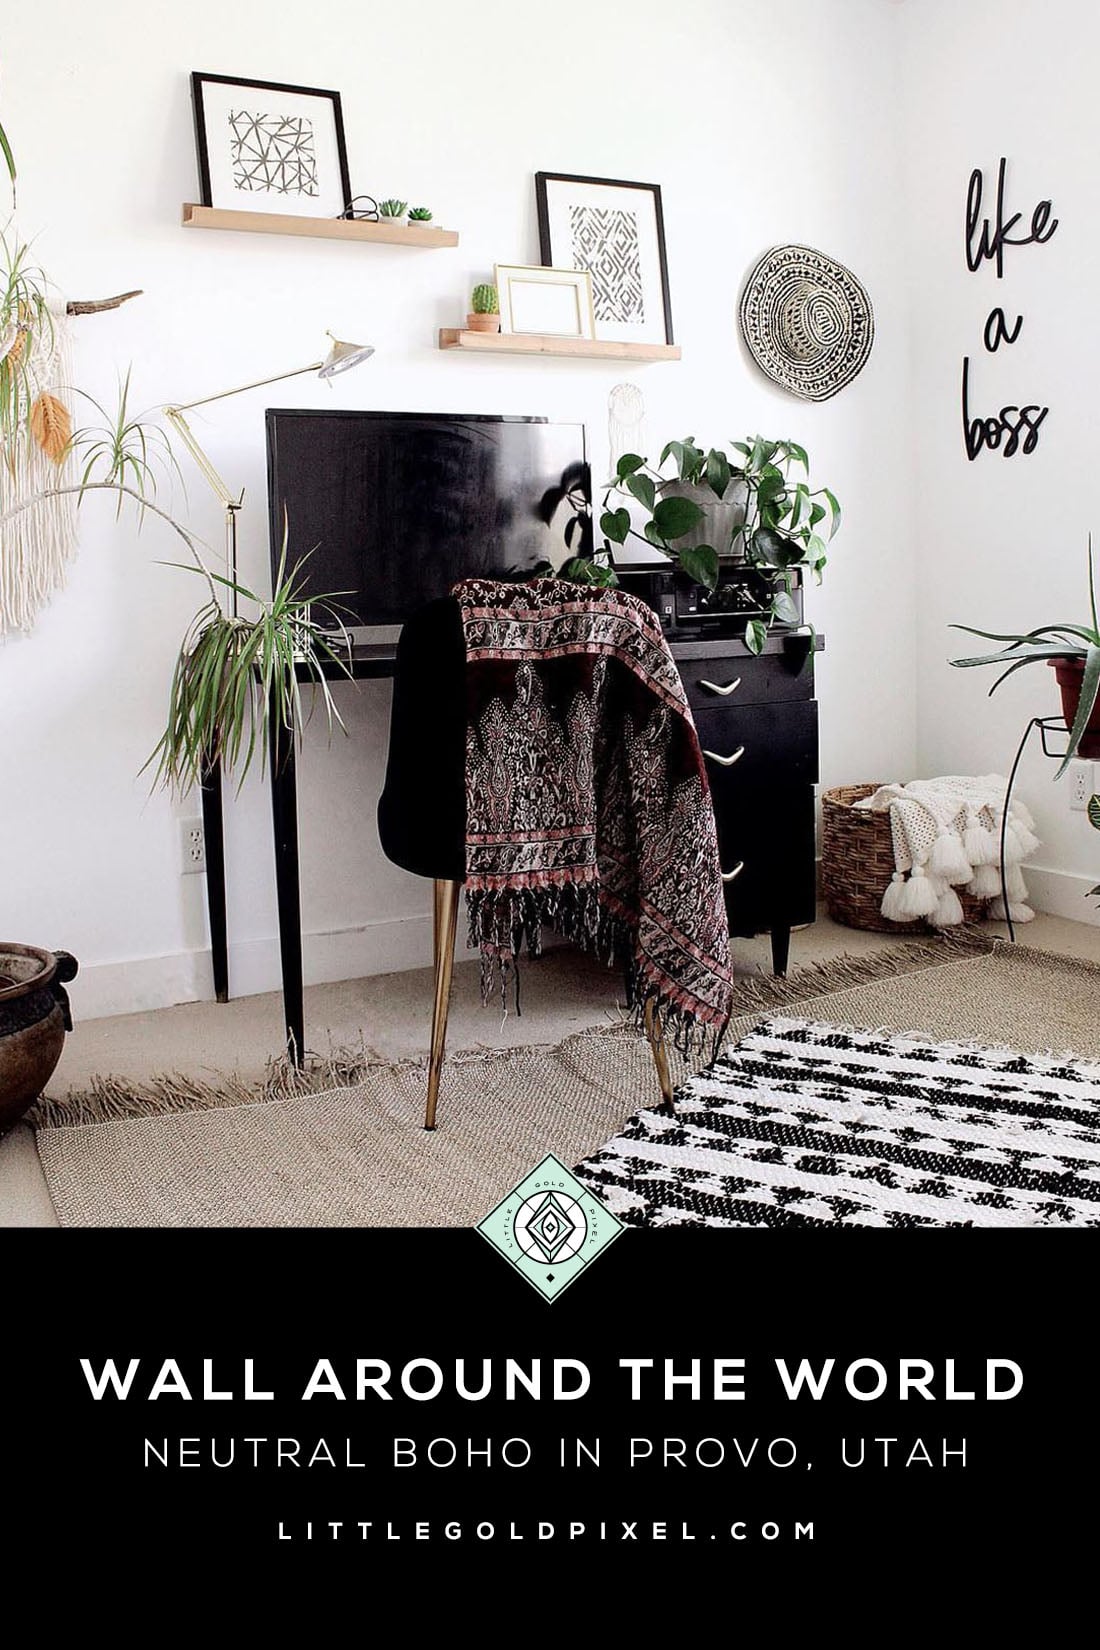 Neutral Boho Gallery Walls • Wall Around the World • Little Gold Pixel • All photos © Aspen Merrill • Come inside Aspen's Provo, Utah, home and get the secrets of her neutral boho gallery walls in the latest installment of Wall Around the World. #neutral #boho #decor #gallerywalls #gallerywallideas